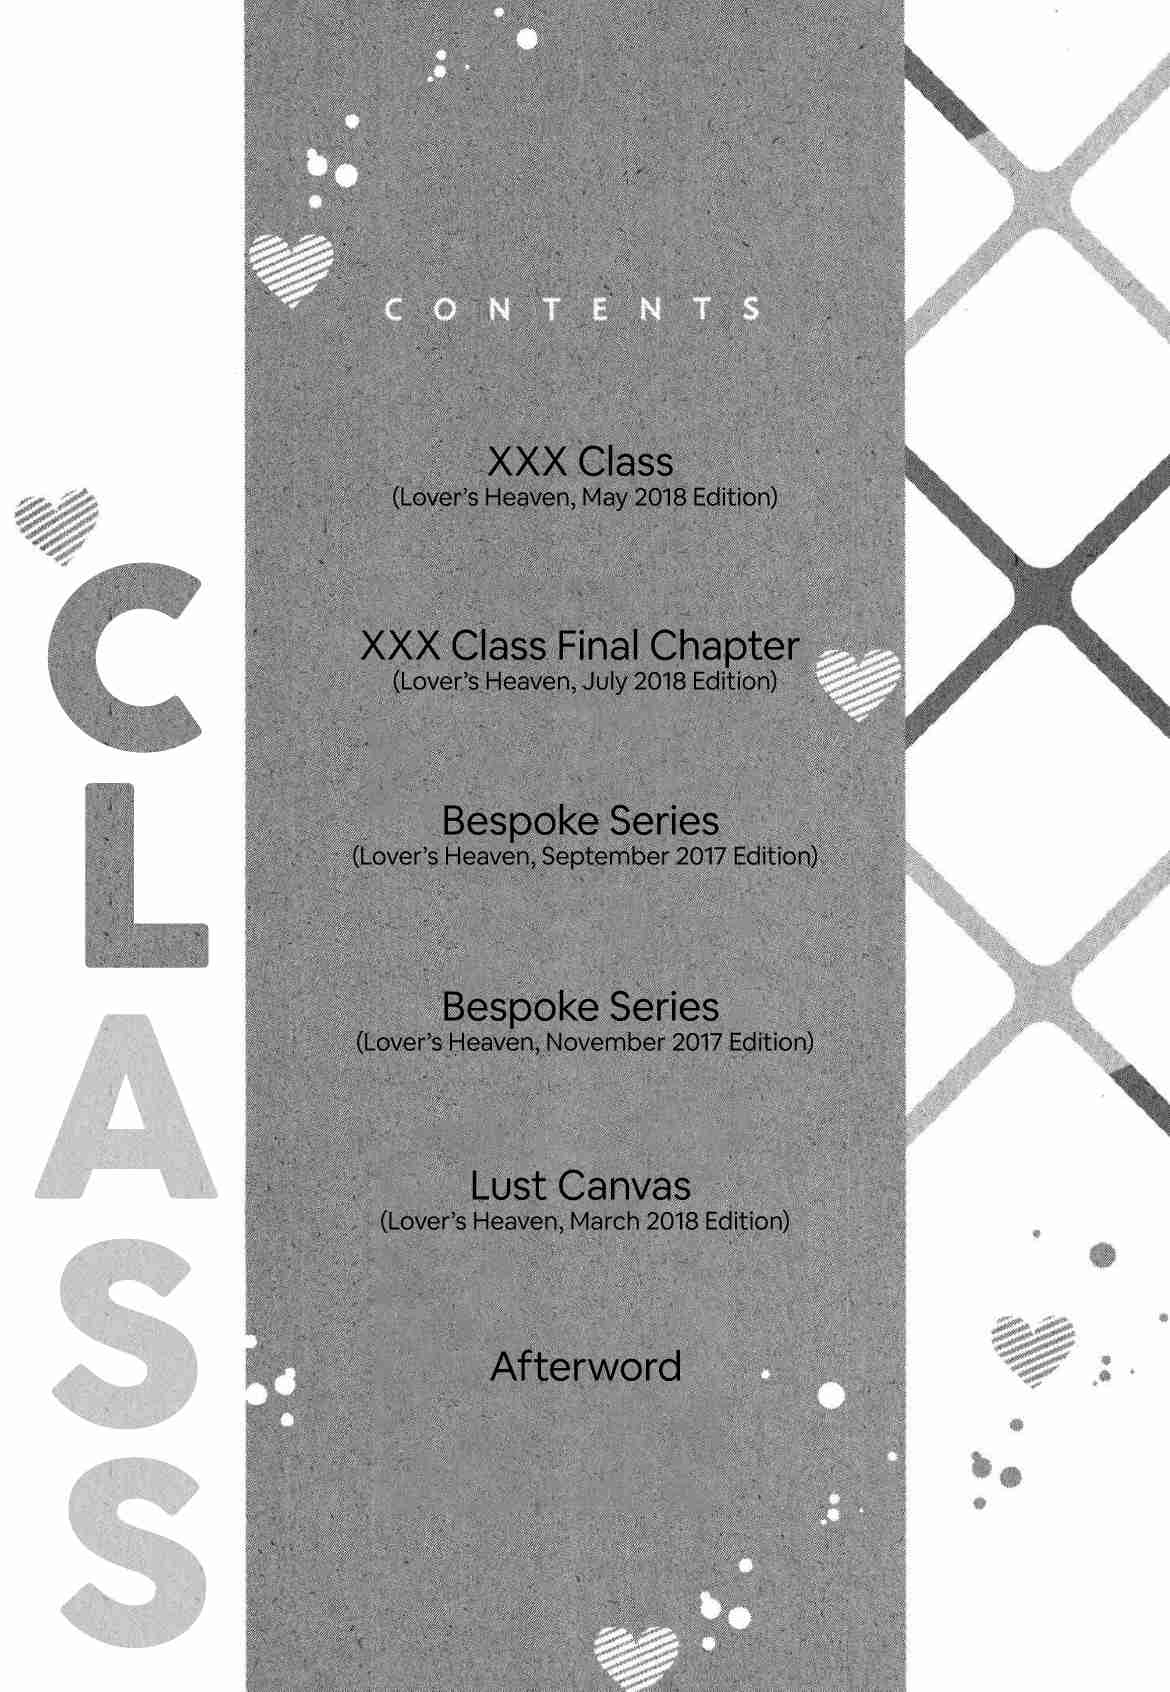 XXX Class: Adult Lecture